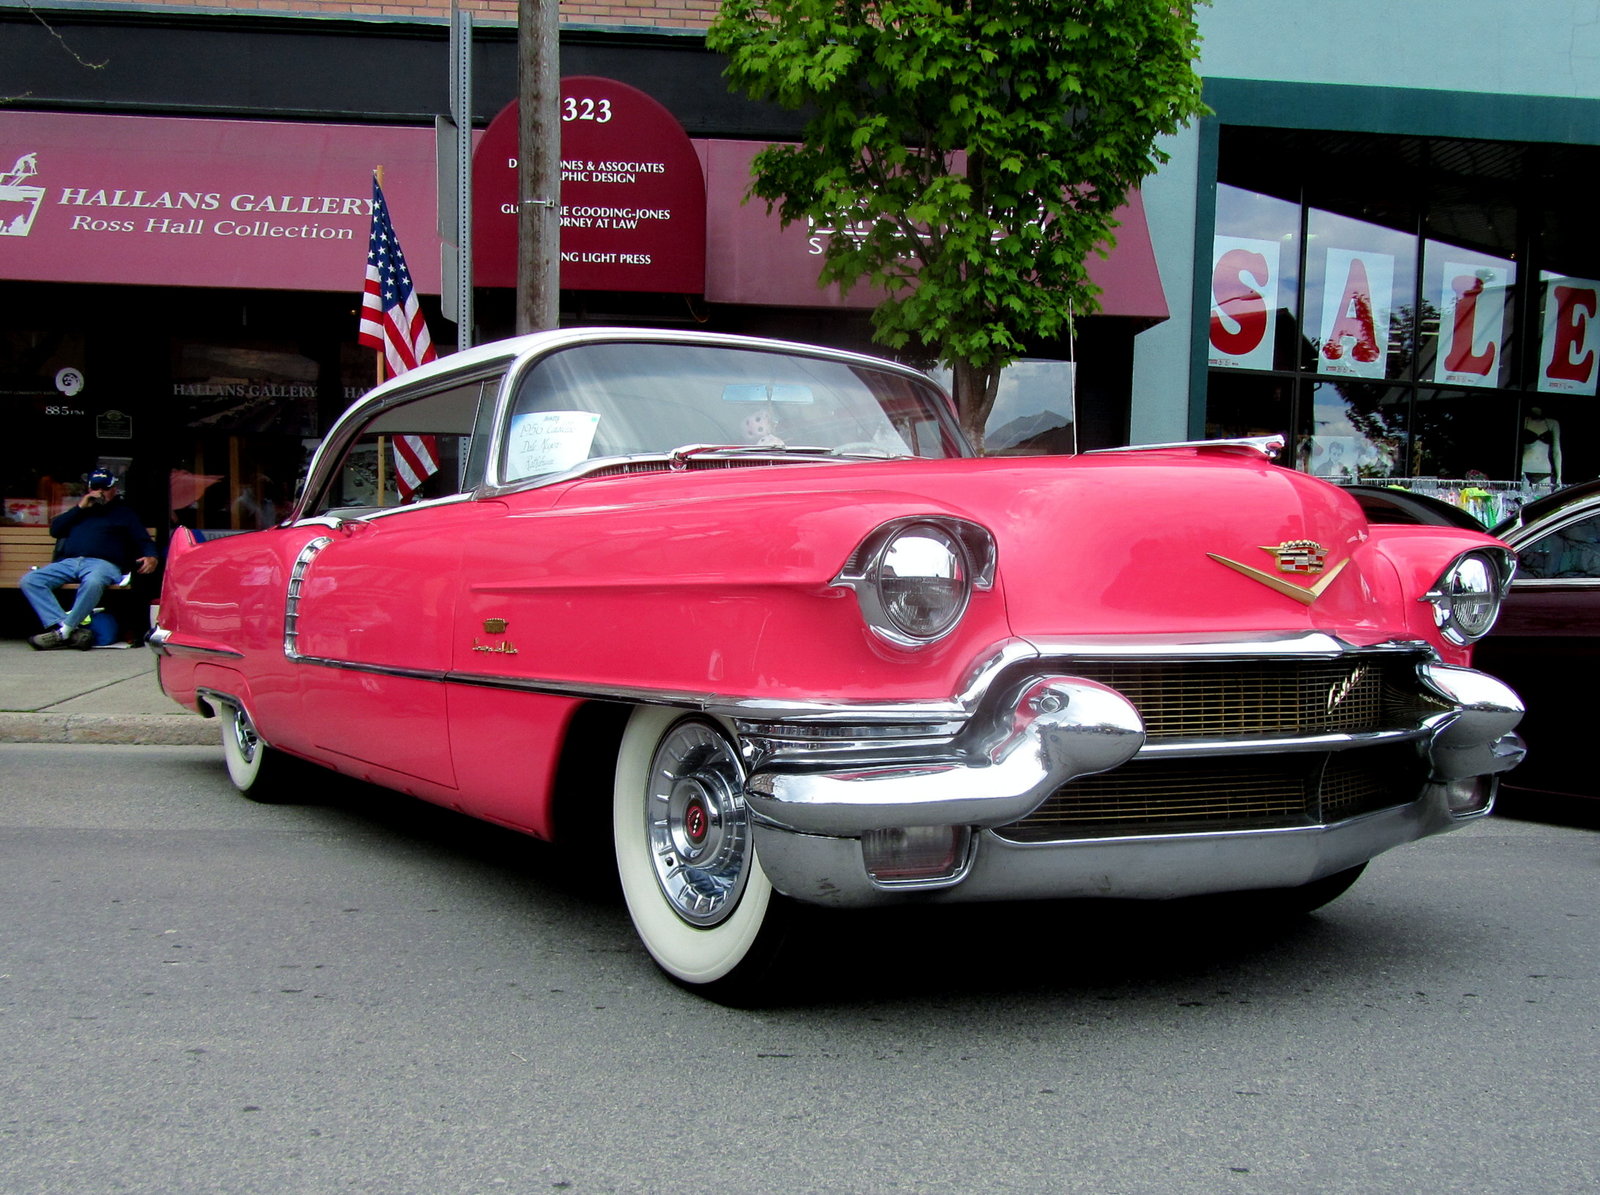 Pink Cadillac Pics, Movie Collection. 